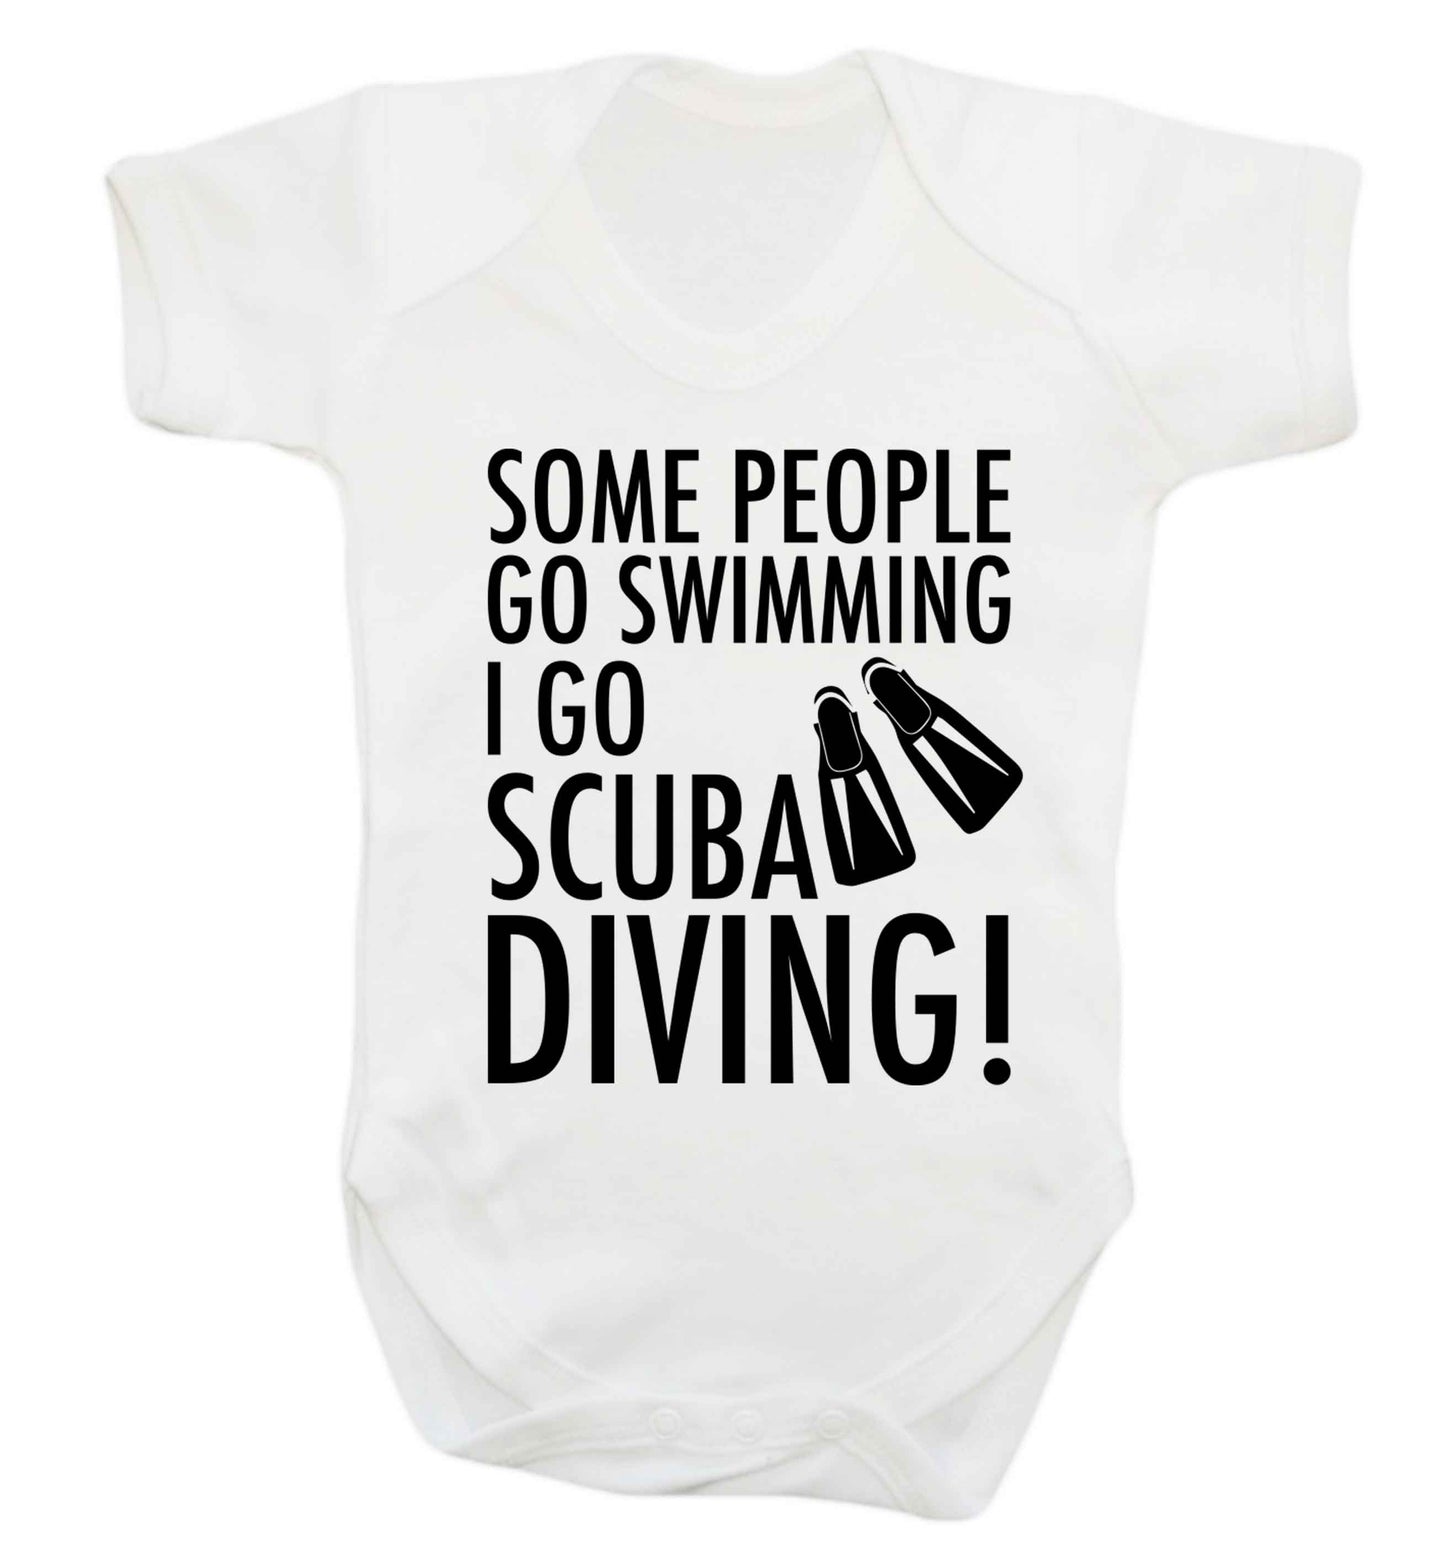 Some people go swimming I go scuba diving! Baby Vest white 18-24 months